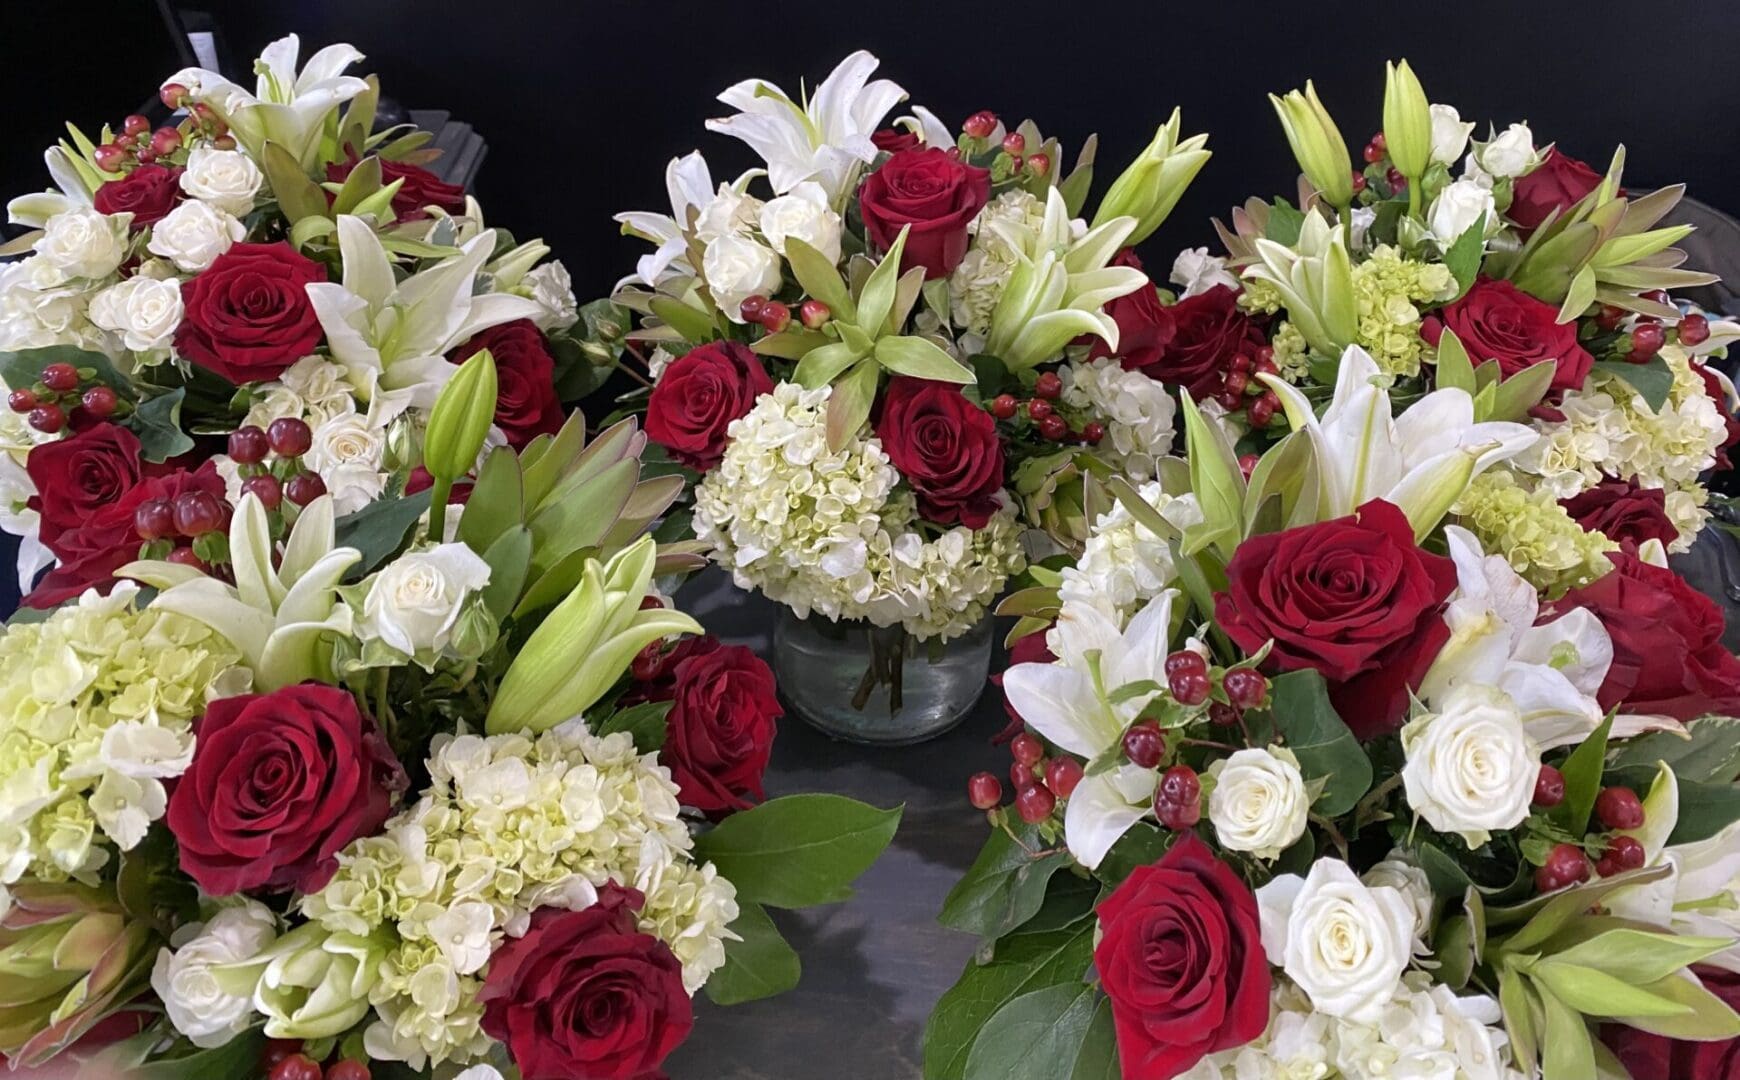 Vases full of red roses and white lilies